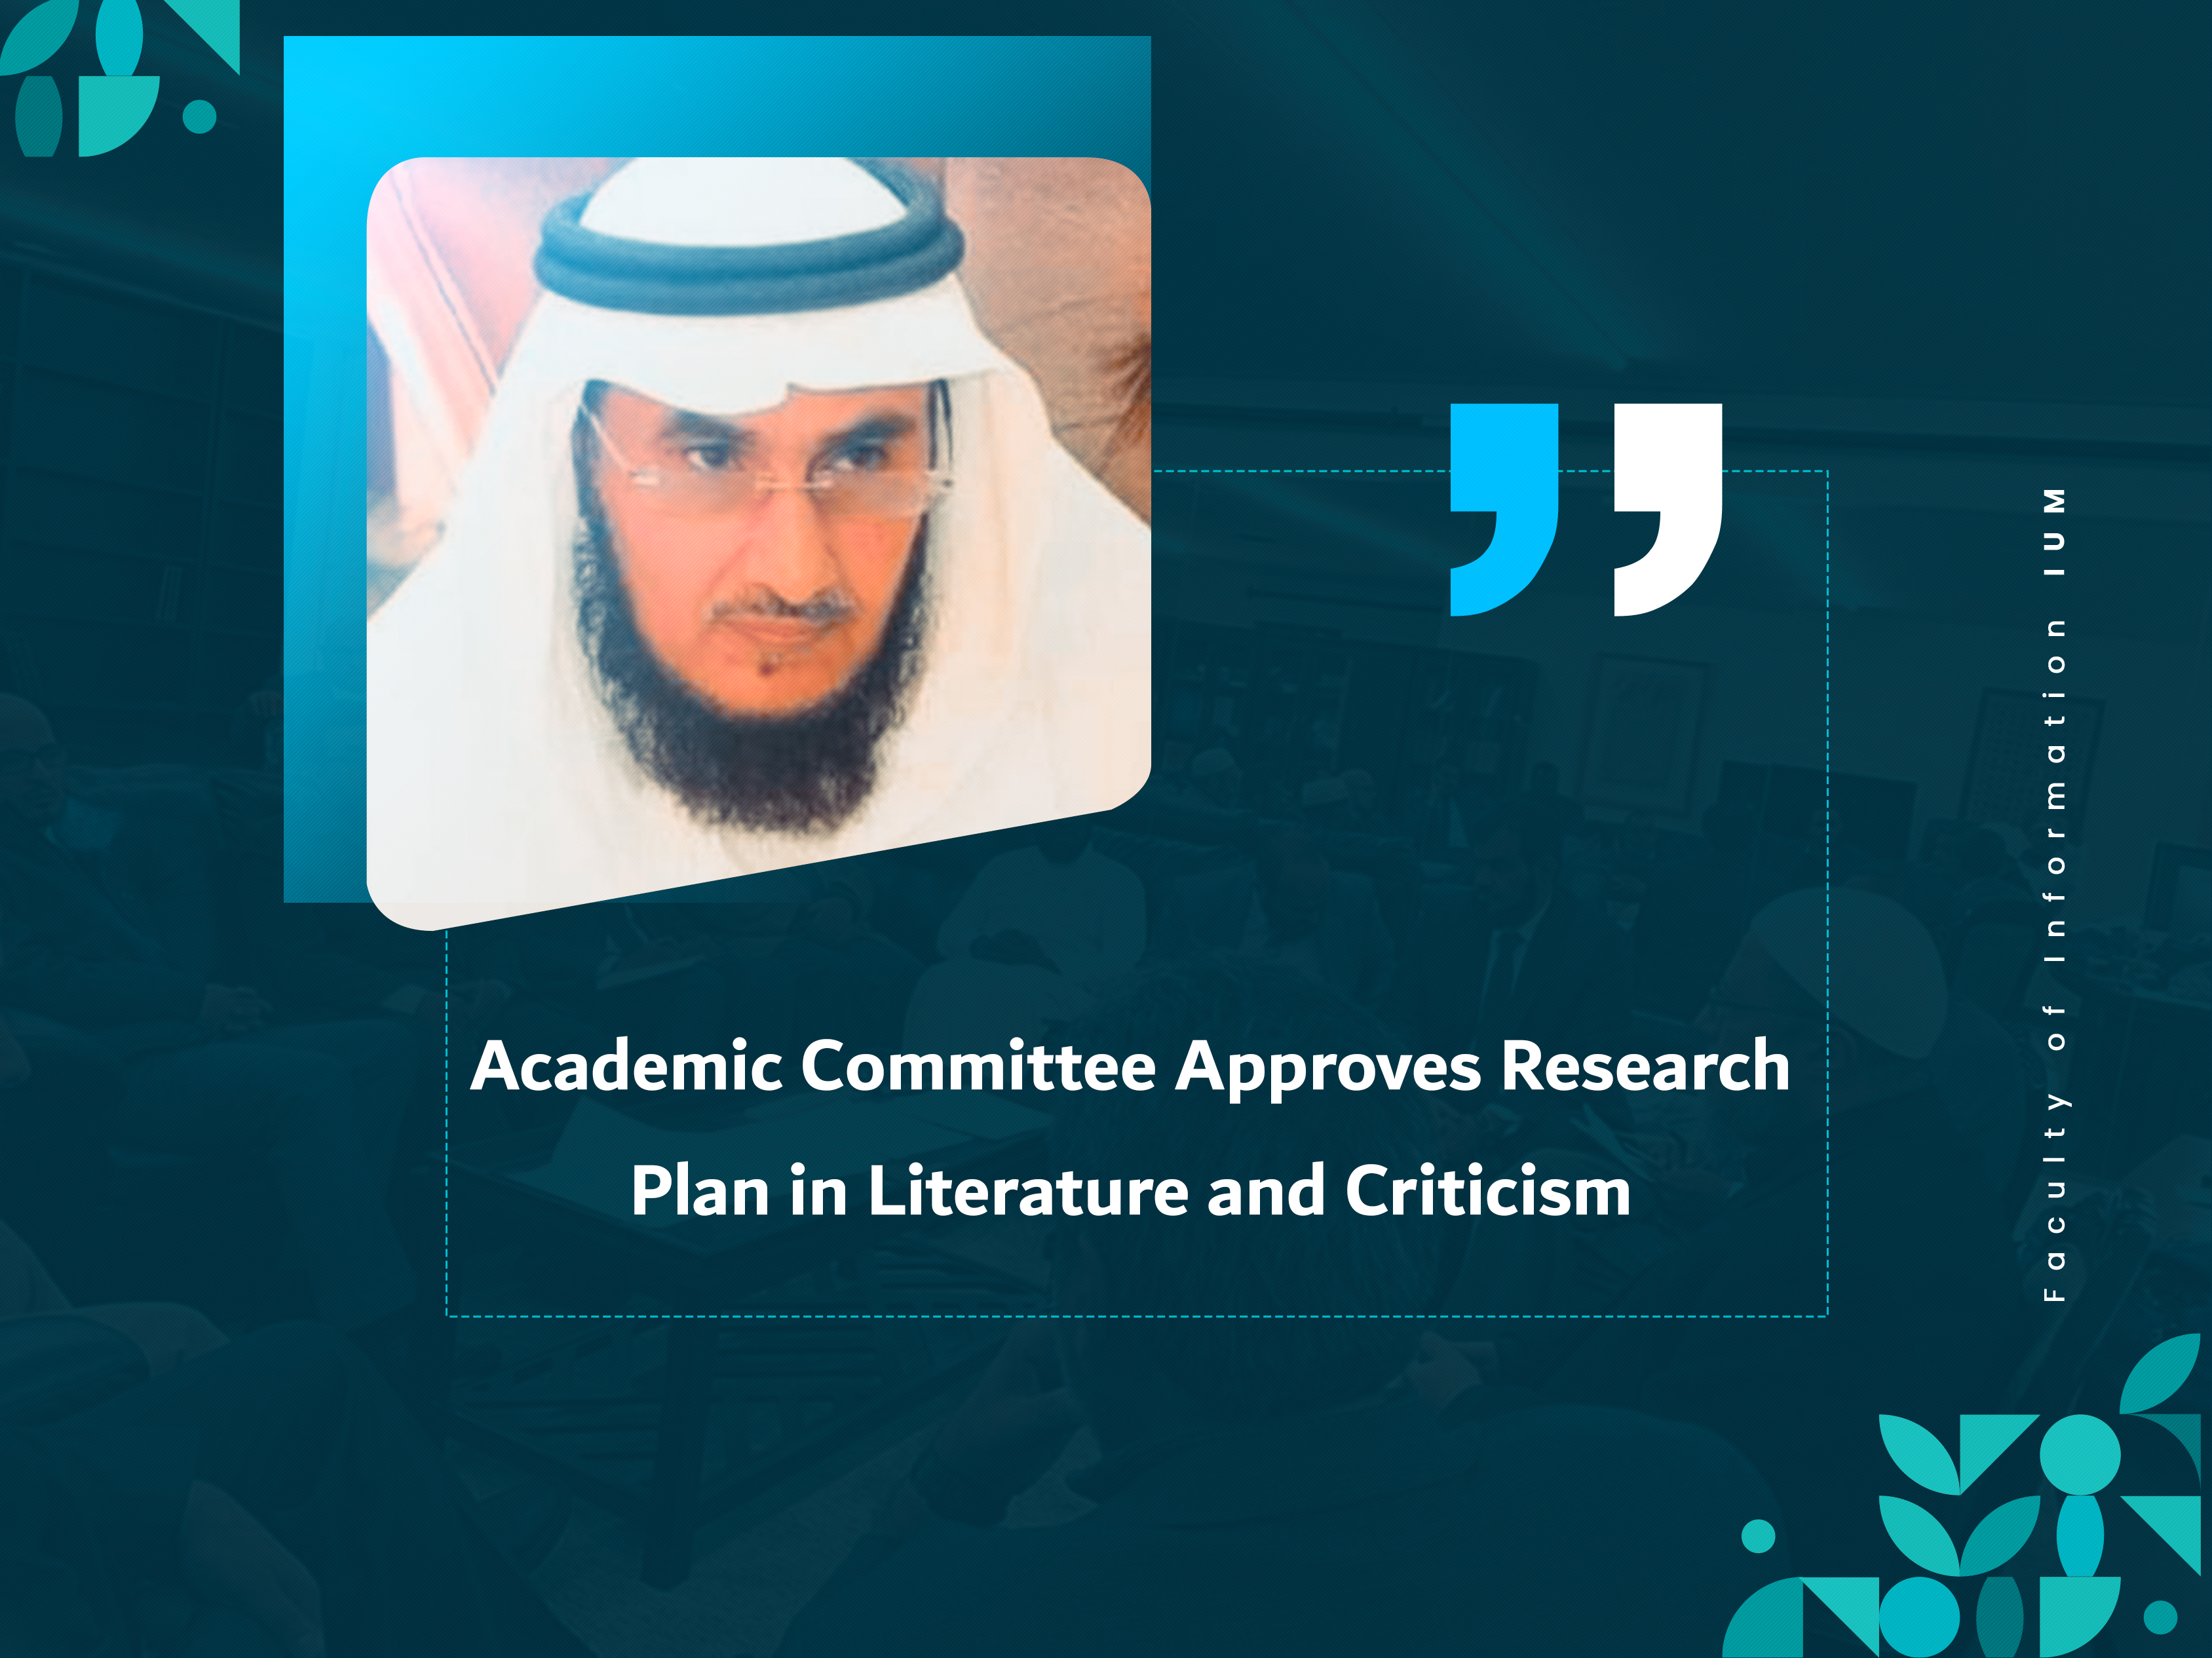 Academic Committee Approves Research Plan in Literature and Criticism